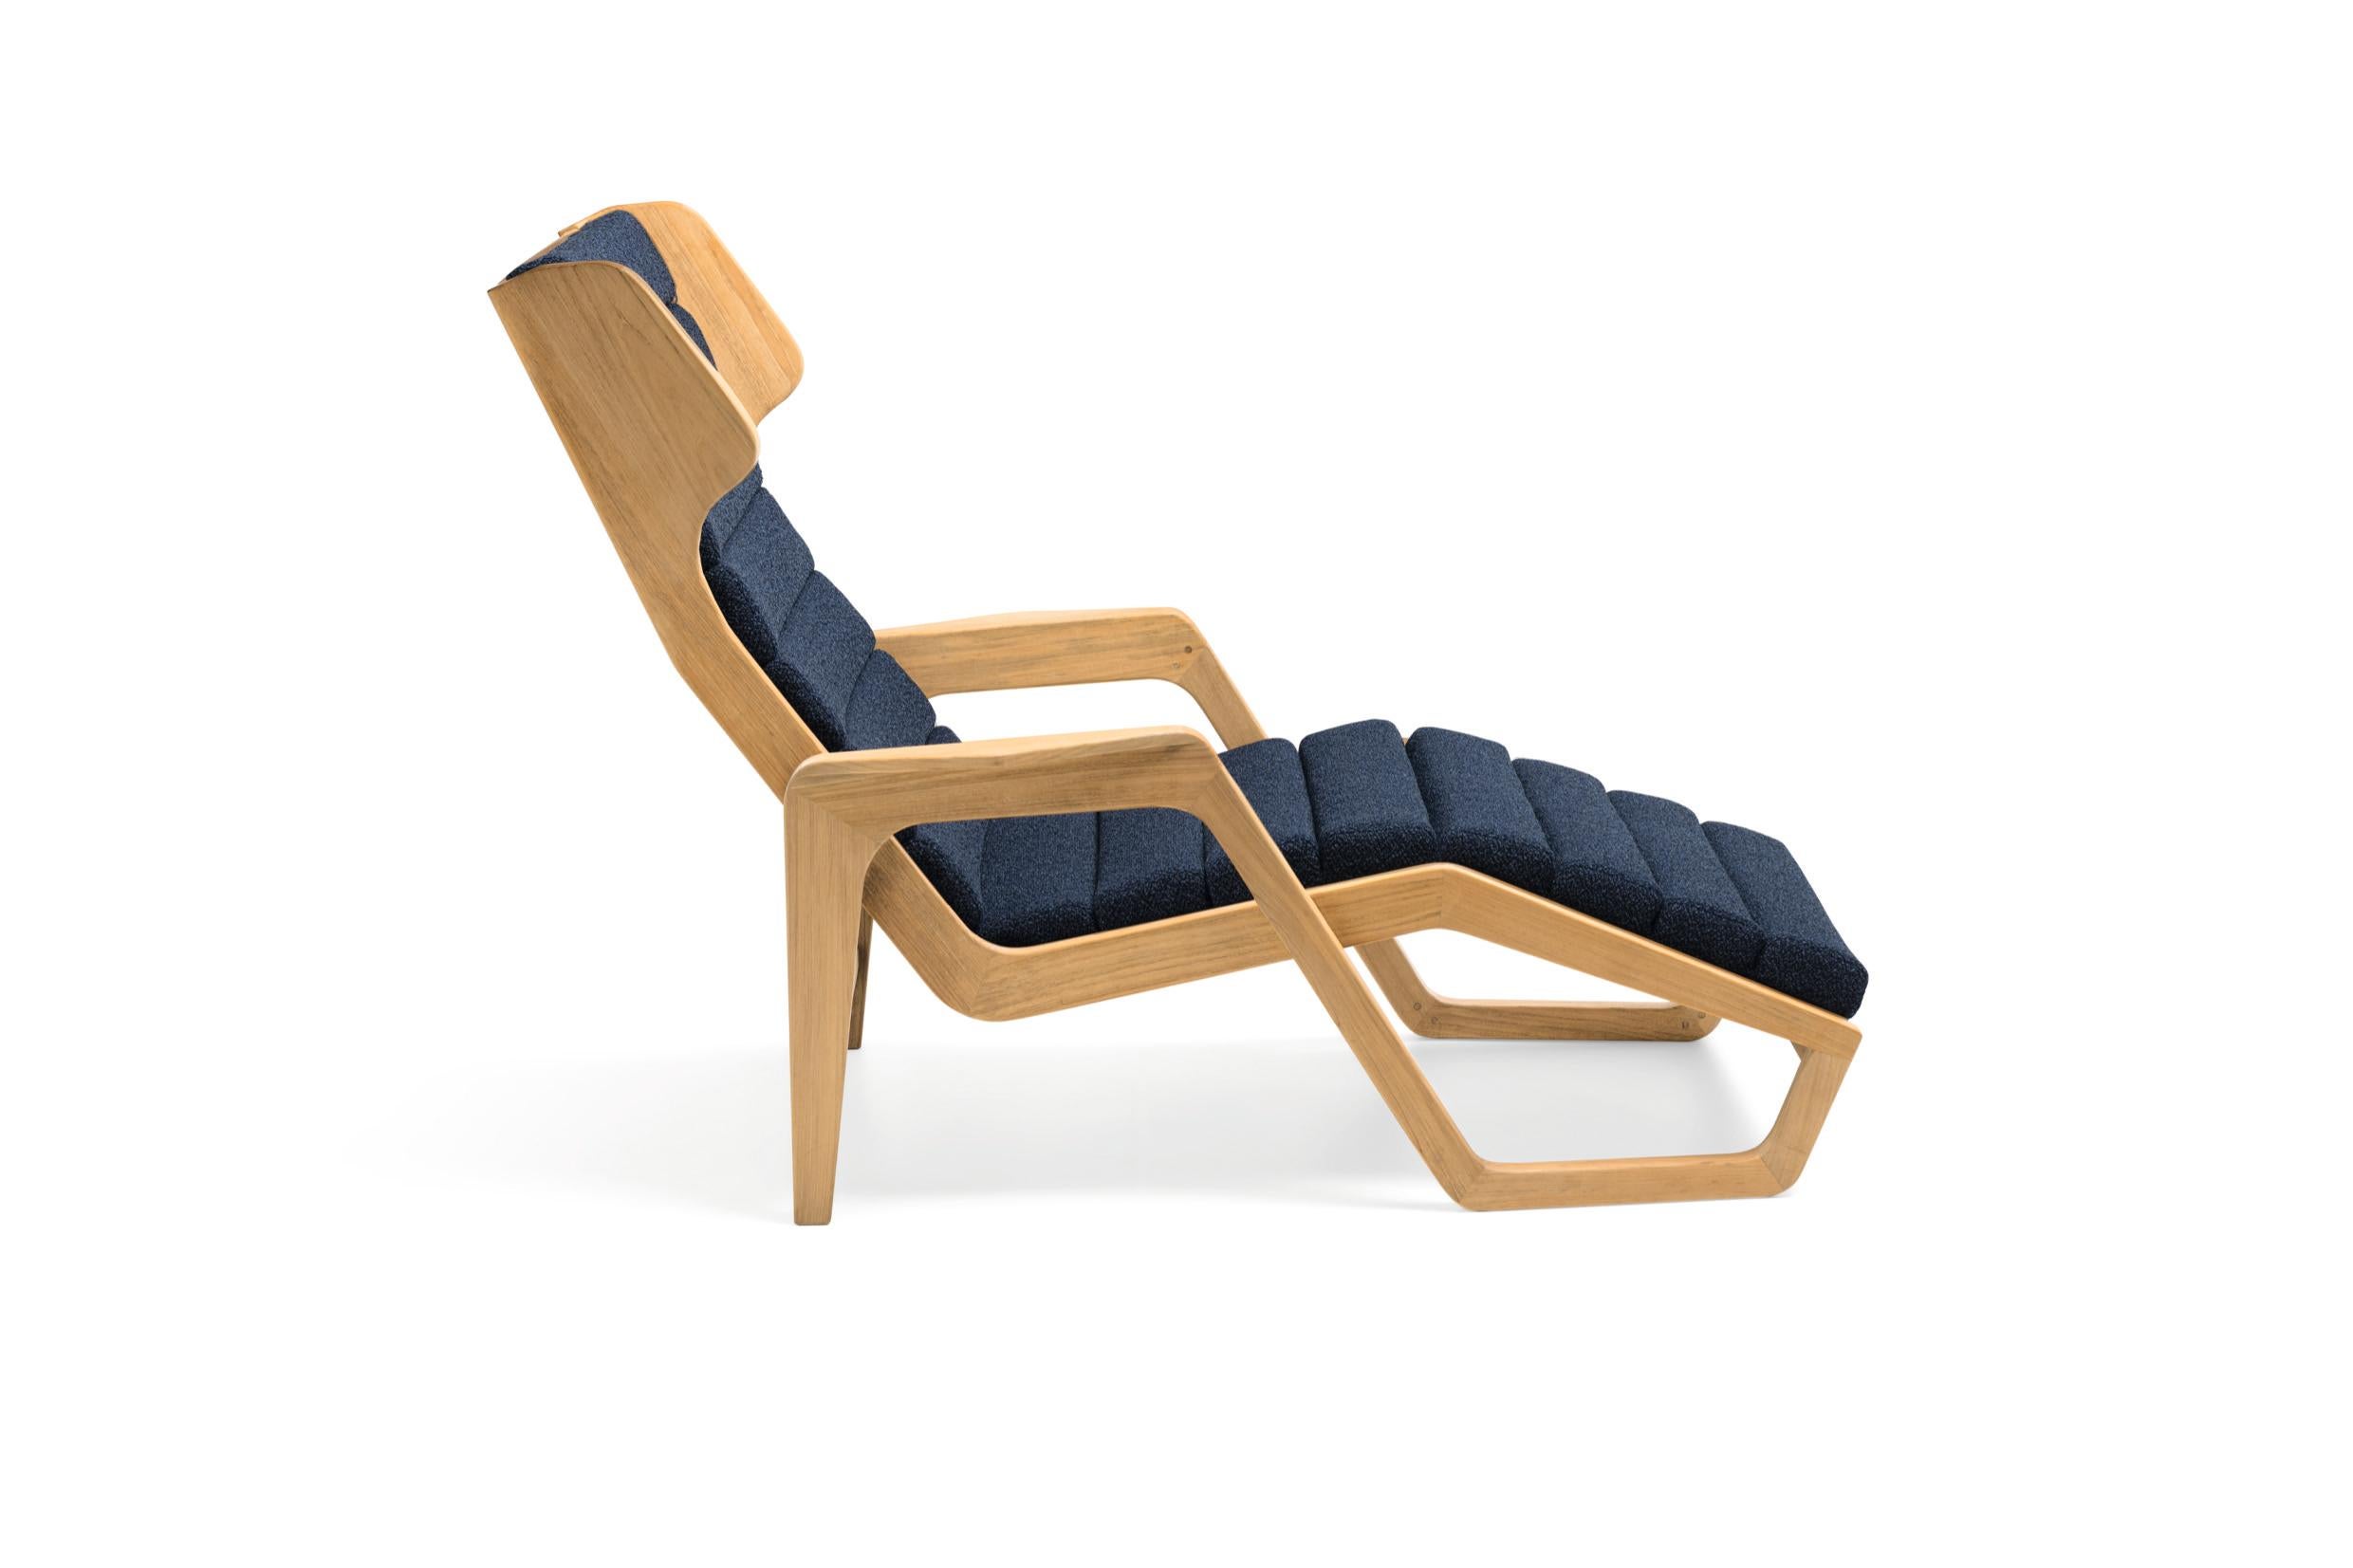 Outdoor Solid Wood Armchair Molteni&C by Giò Ponti Design D.150.5
The D.150.5 solid wood chaise longue, designed by Gio Ponti for the cruise ship Andrea Doria in 1952, is back. Recreating an iconic design by Gio Ponti for outdoor spaces, the D.150.5